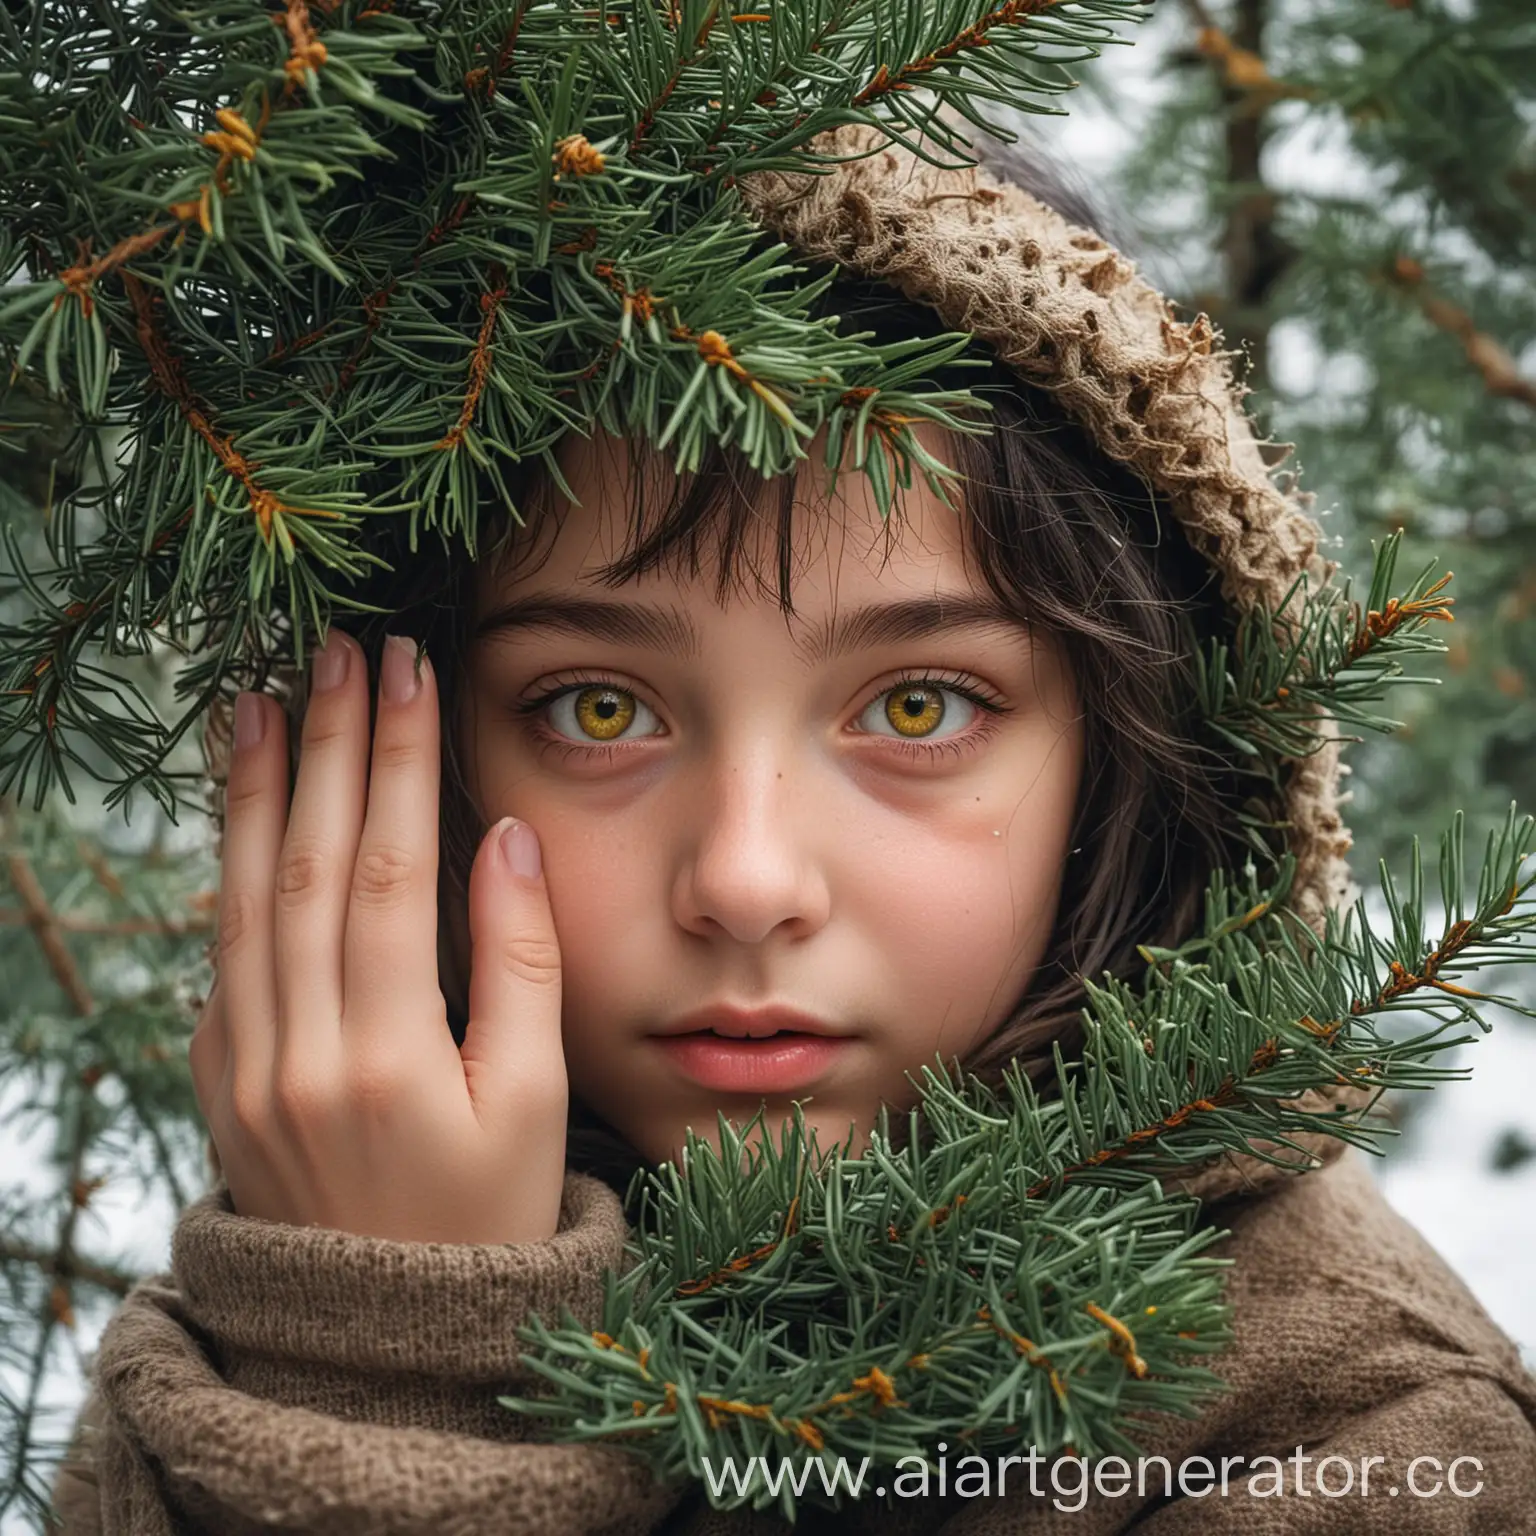 Girl-with-Yellow-Eyes-Holding-Fir-Branch-in-Winter-Forest